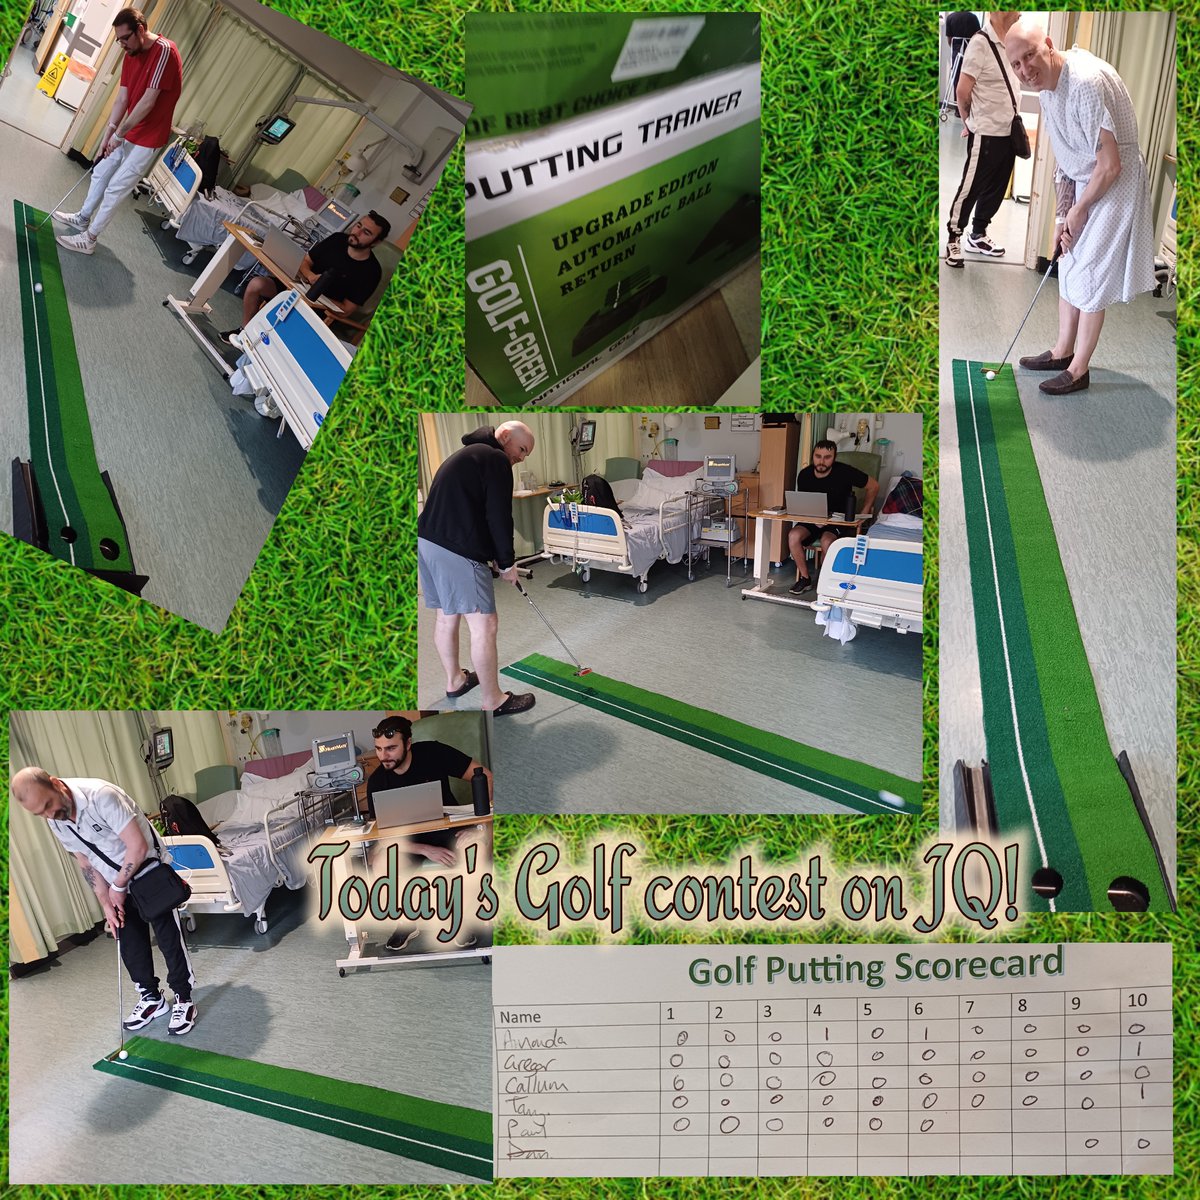 Motivated morning on JQ as we had a Transplant Tee off, No special treatment for patients though, as it was a competition after all! There was only one queen of clubs on this occasion as you can see from the scorecard😆#compete #Golf @Michaela0895 @vikki_warman @MFT_PatientExp